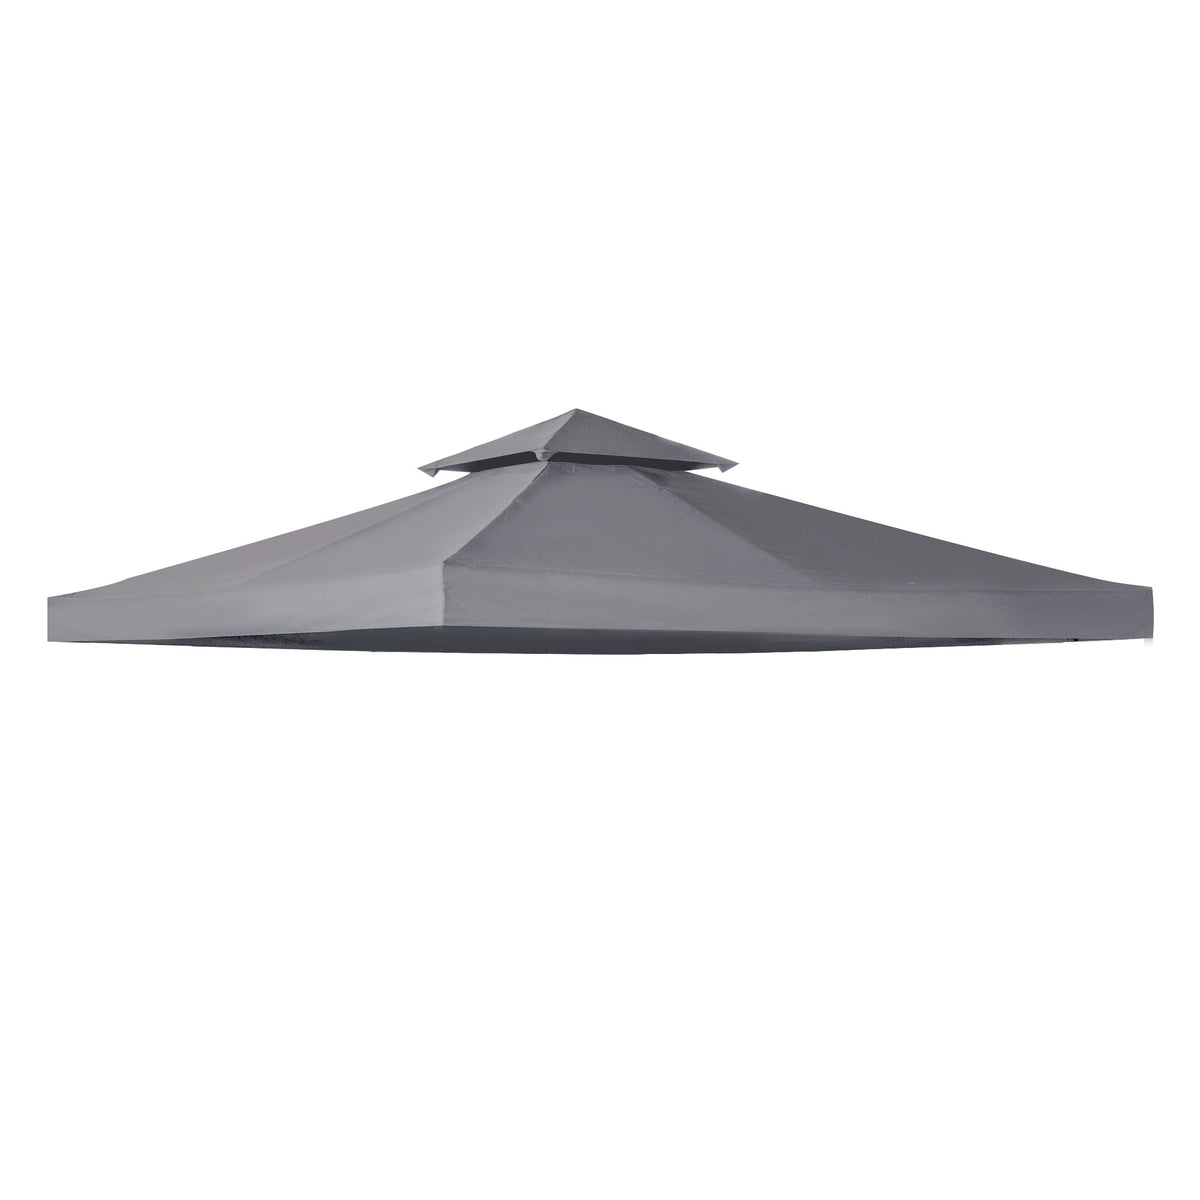 Outsunny Gazebo Canopy Roof Top Replacement Cover, 3 x 3m, Spare Part, Deep Grey (TOP ONLY) - TovaHaus